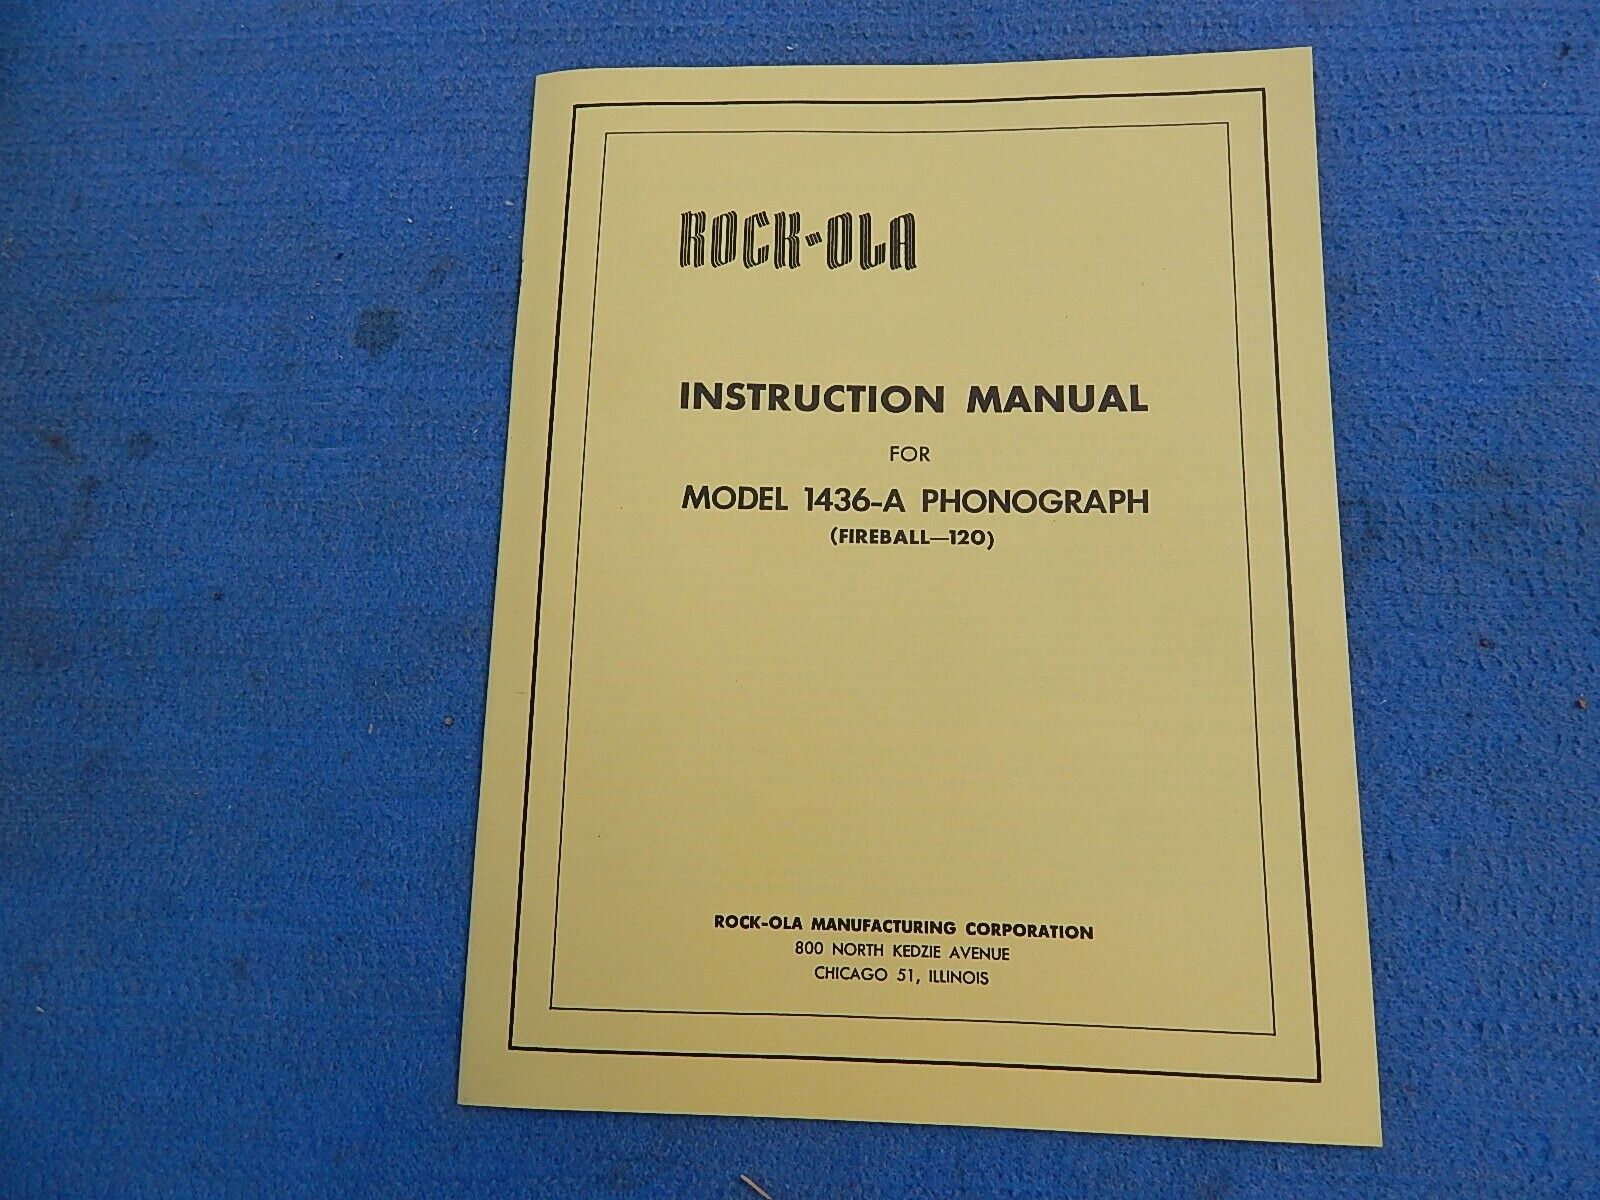 Rock-ola 1436-A Instruction Manual # 17302 - original from Patent Lawyer files